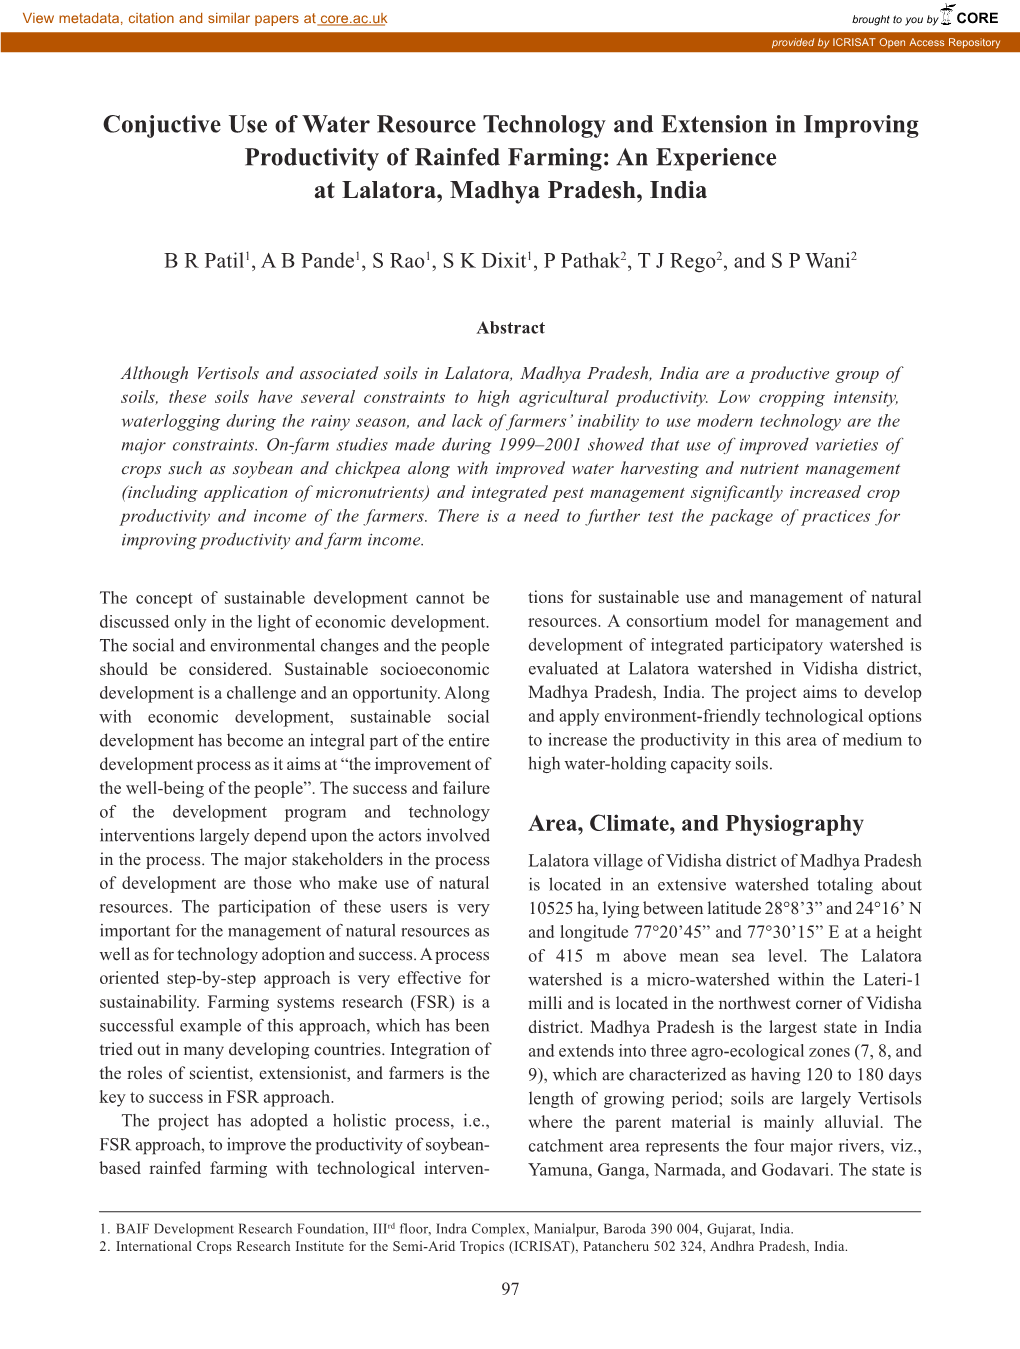 Conjuctive Use of Water Resource Technology and Extension in Improving Productivity of Rainfed Farming: an Experience at Lalatora, Madhya Pradesh, India